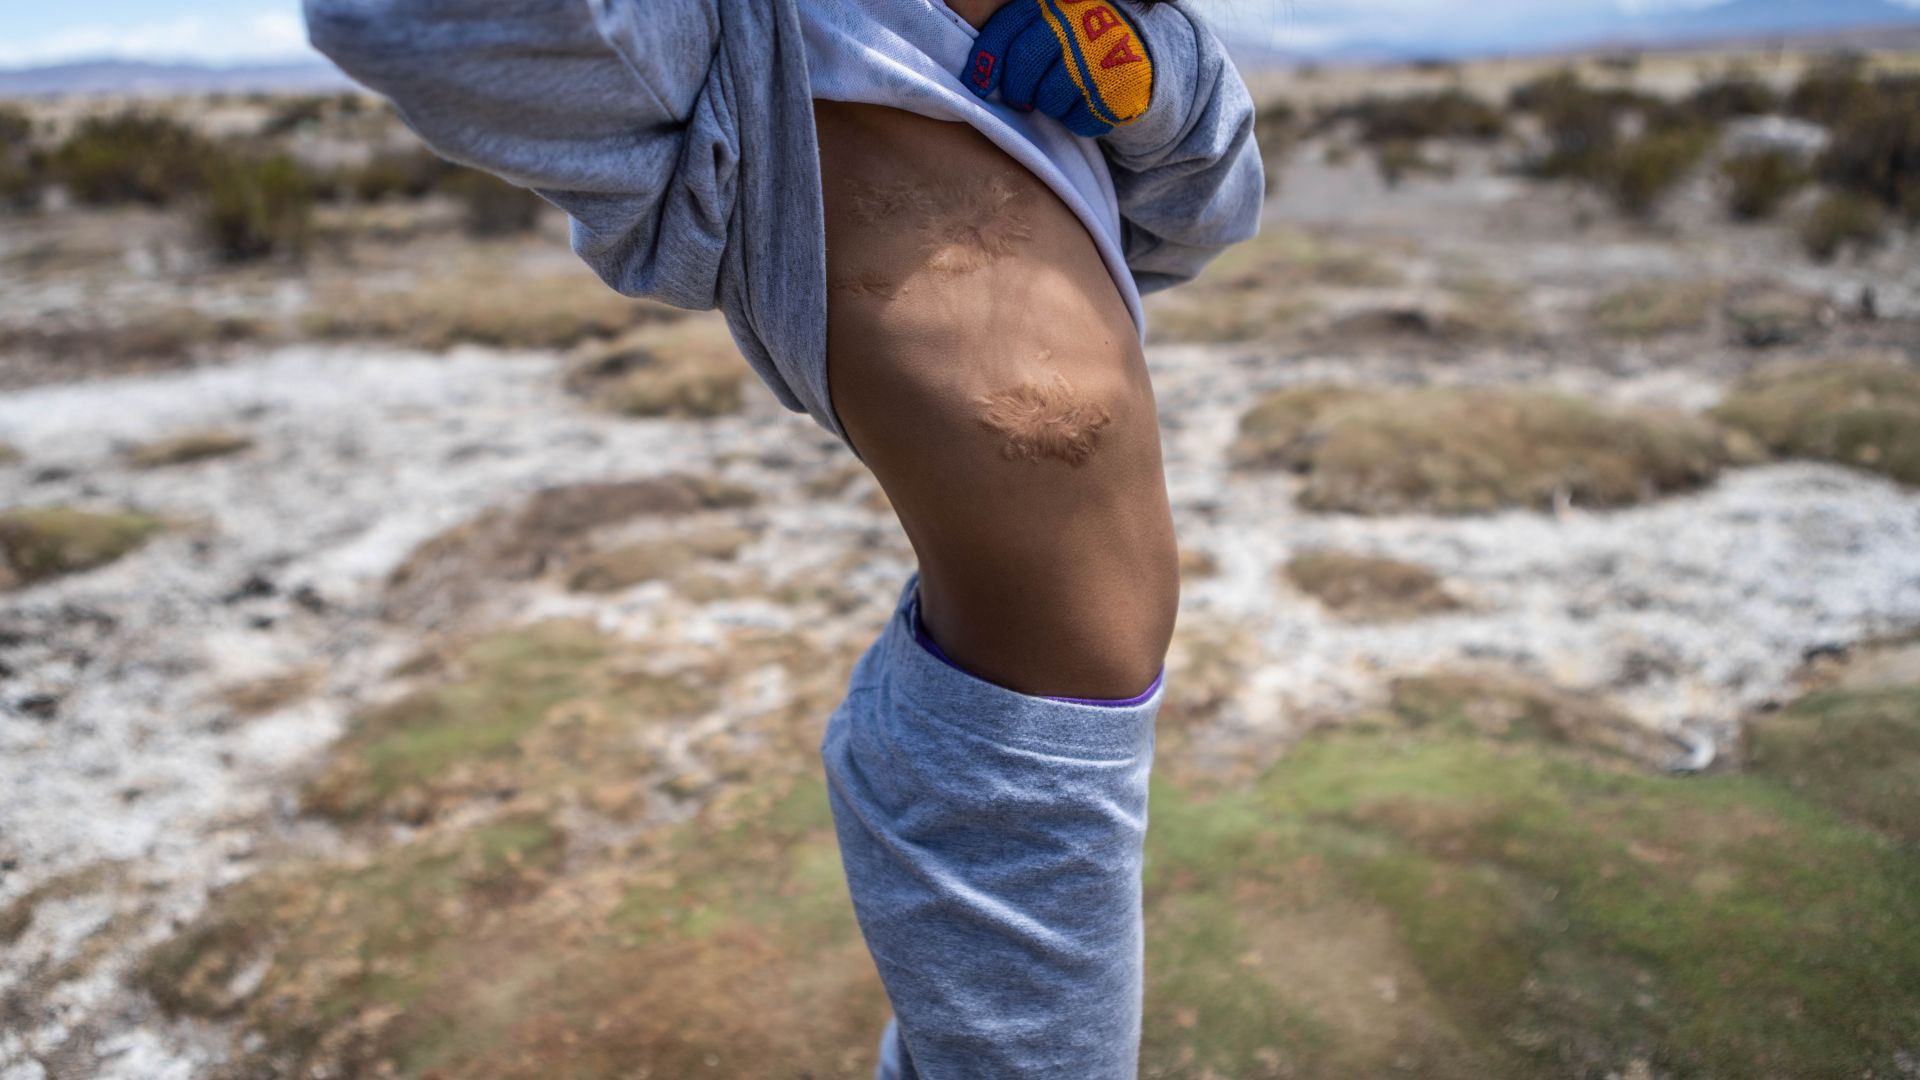 A young girl lifts her grey sweatshirt to reveal knots of scar tissue where her lung surgery took place.